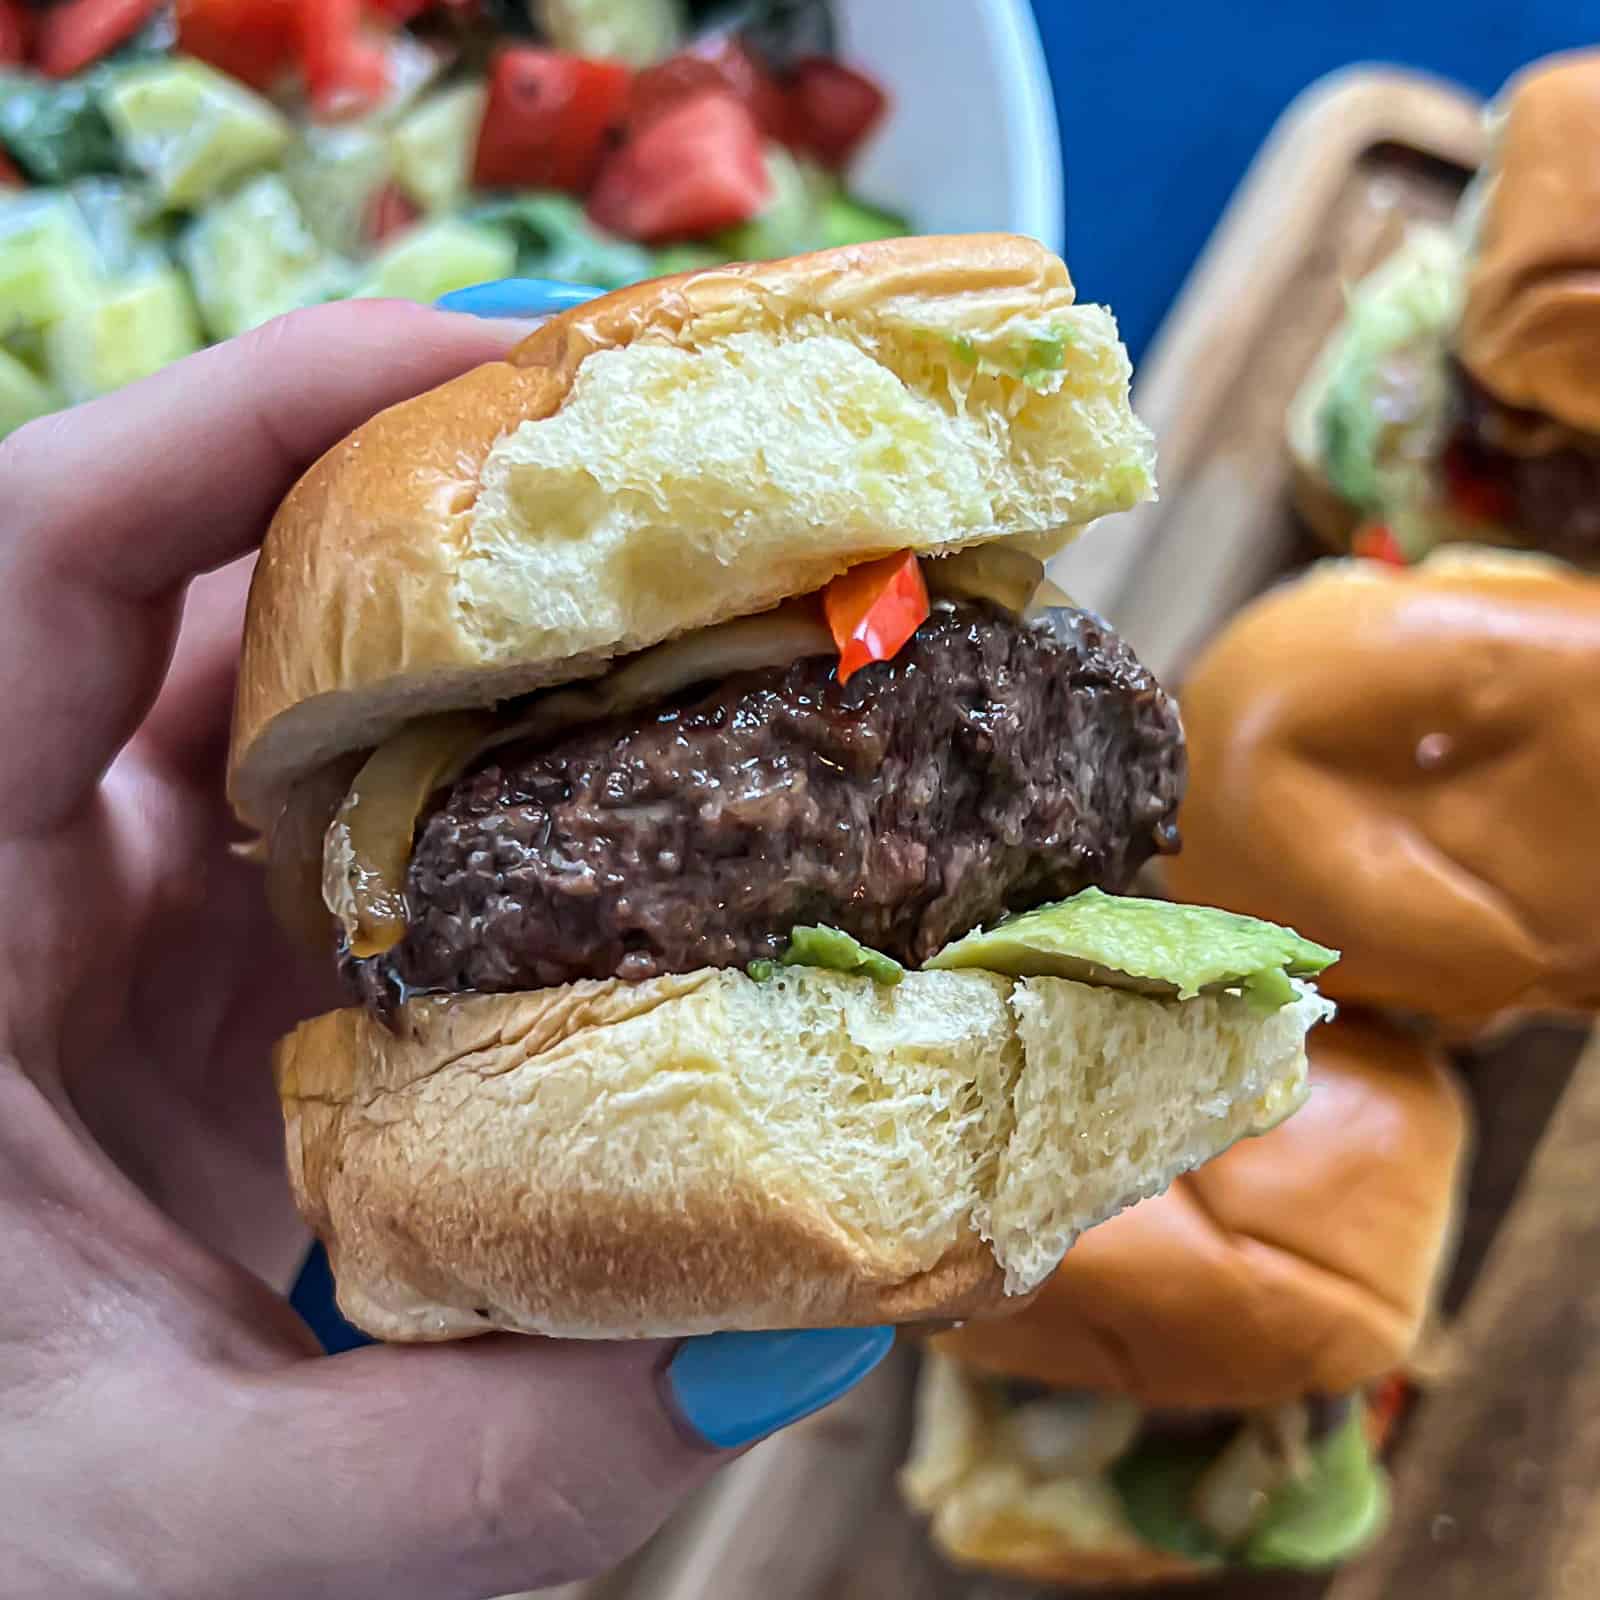 How long to cook sliders